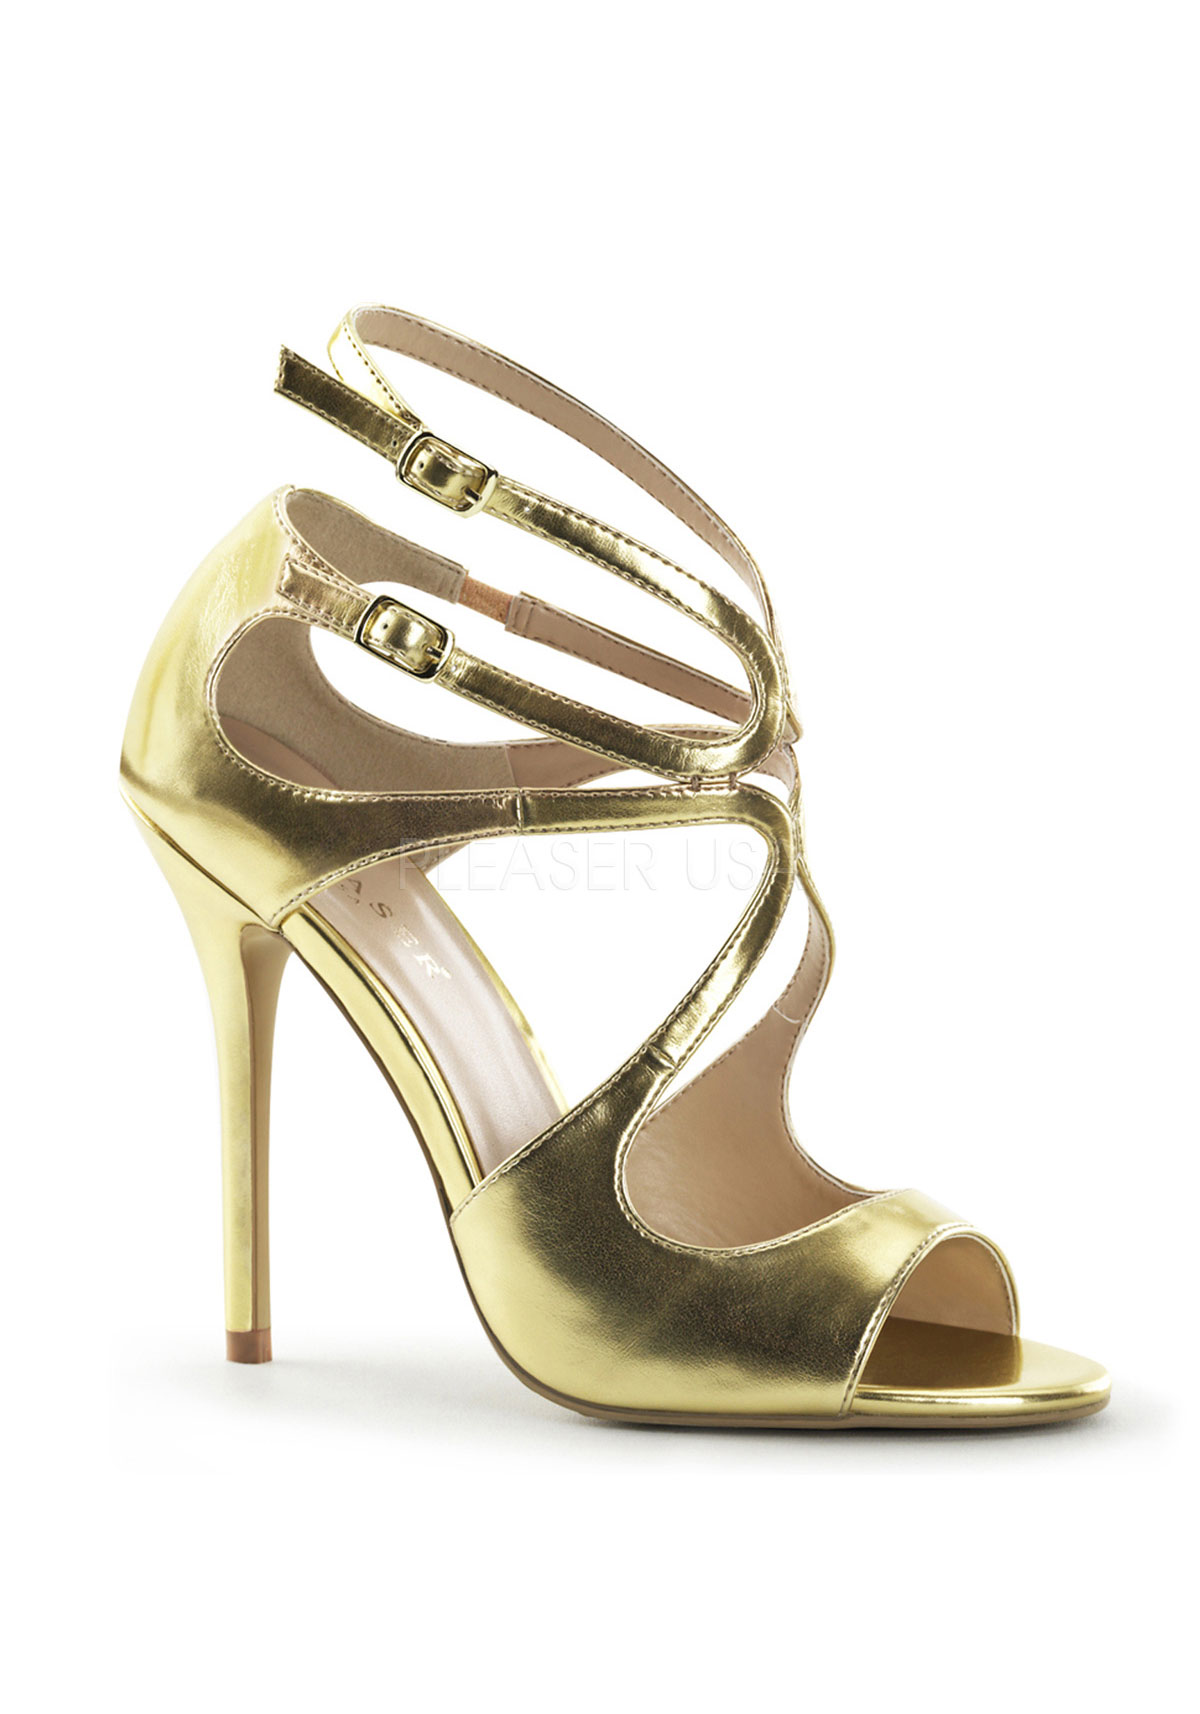 Pleaser 5 Inch Heel  Strappy Sandal With Cutout Detail